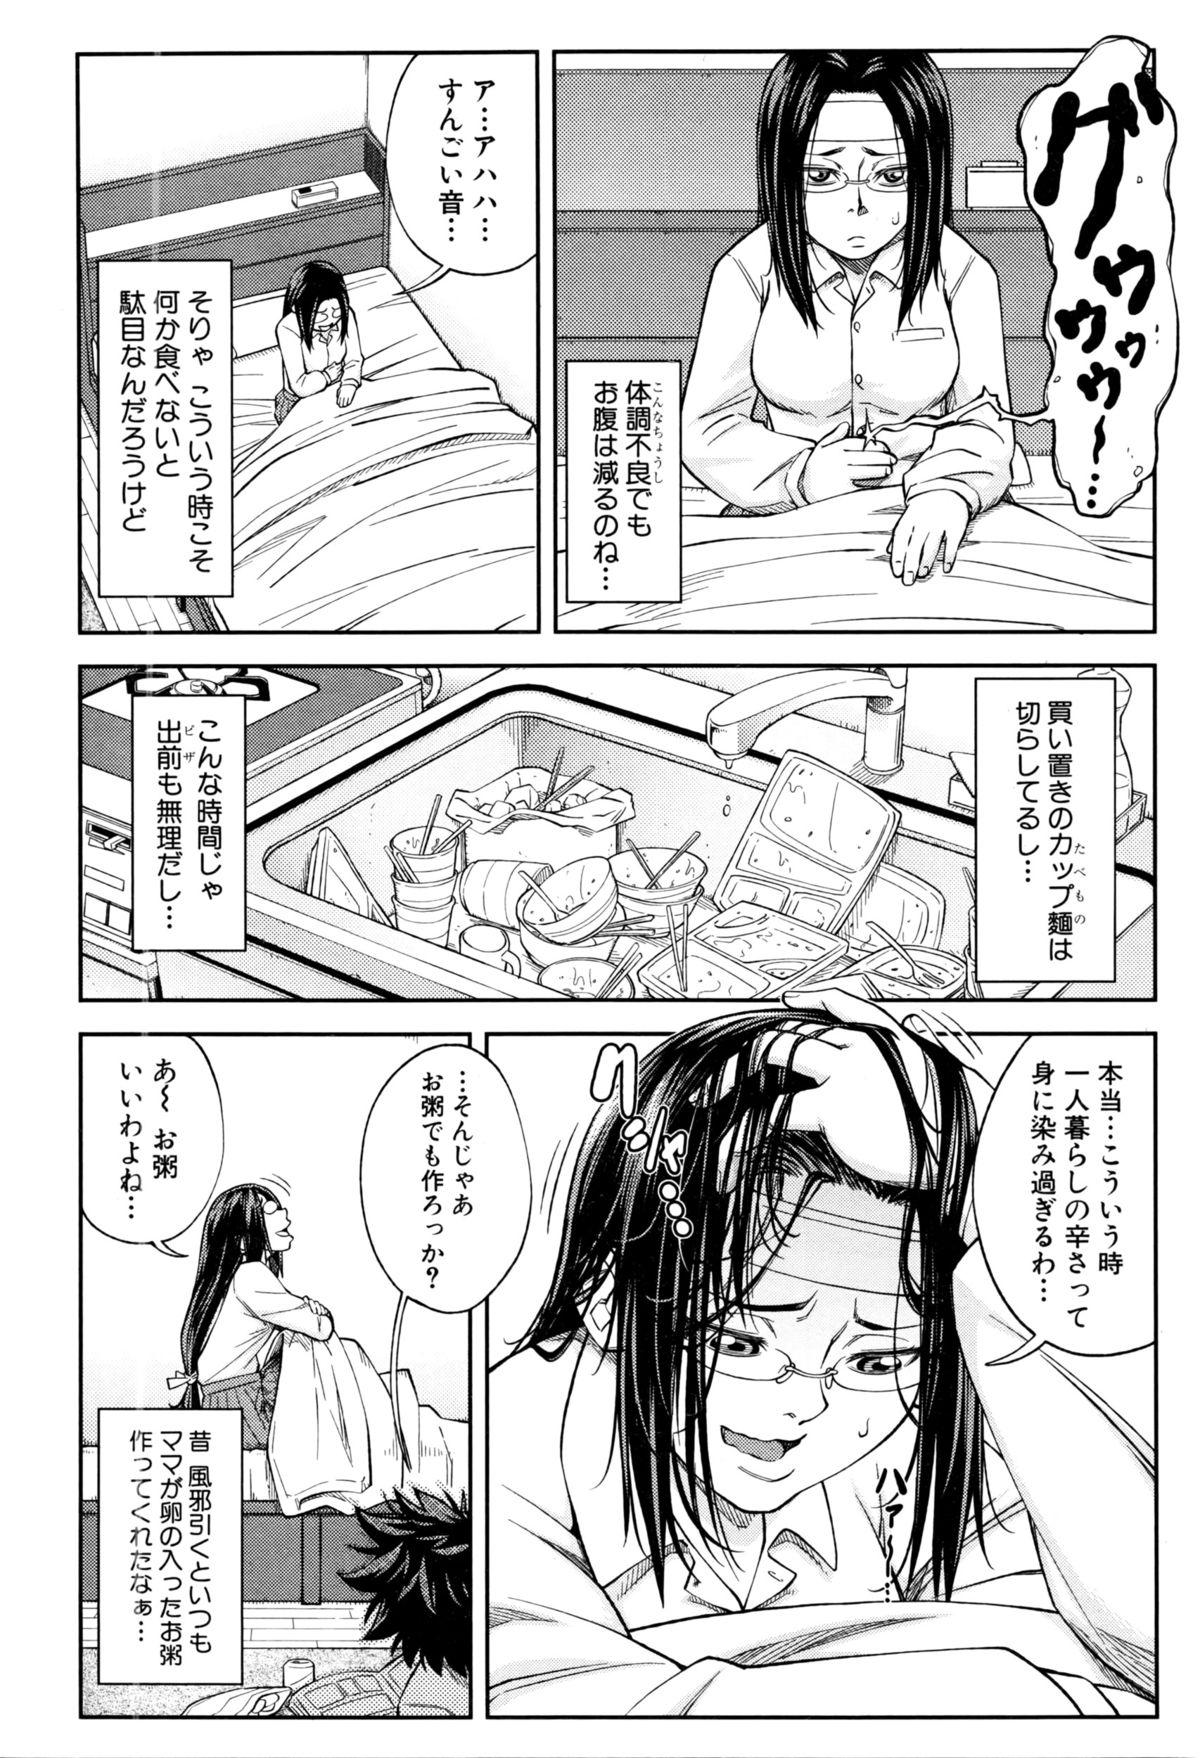 BUSTER COMIC 2016-03 106